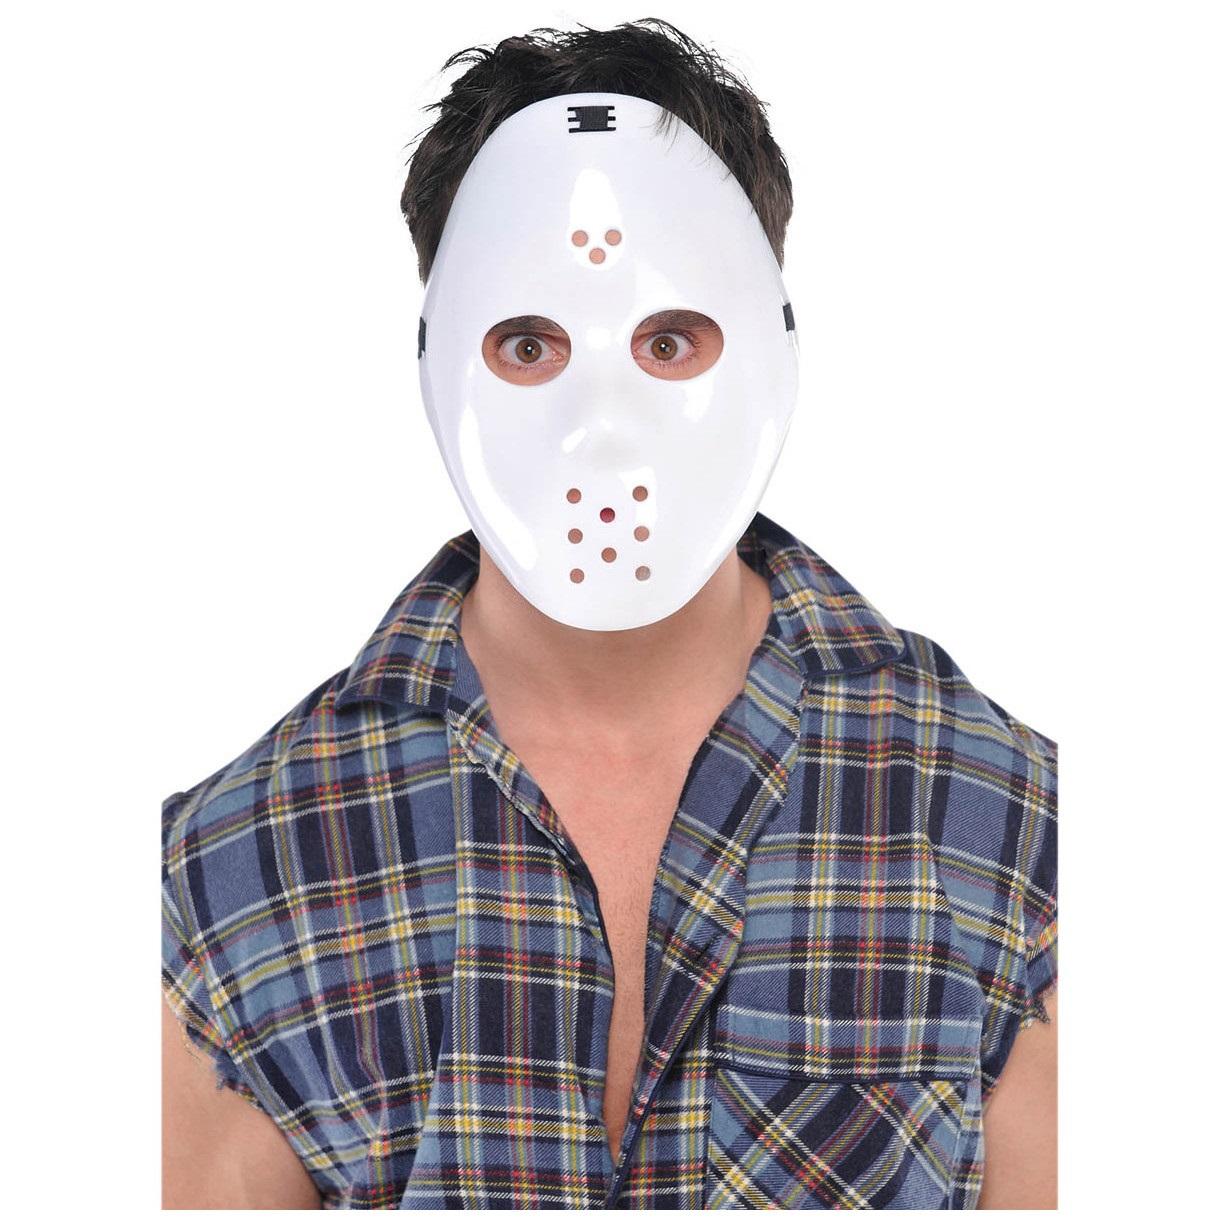 Hockey Mask Costumes & Apparel - Party Centre